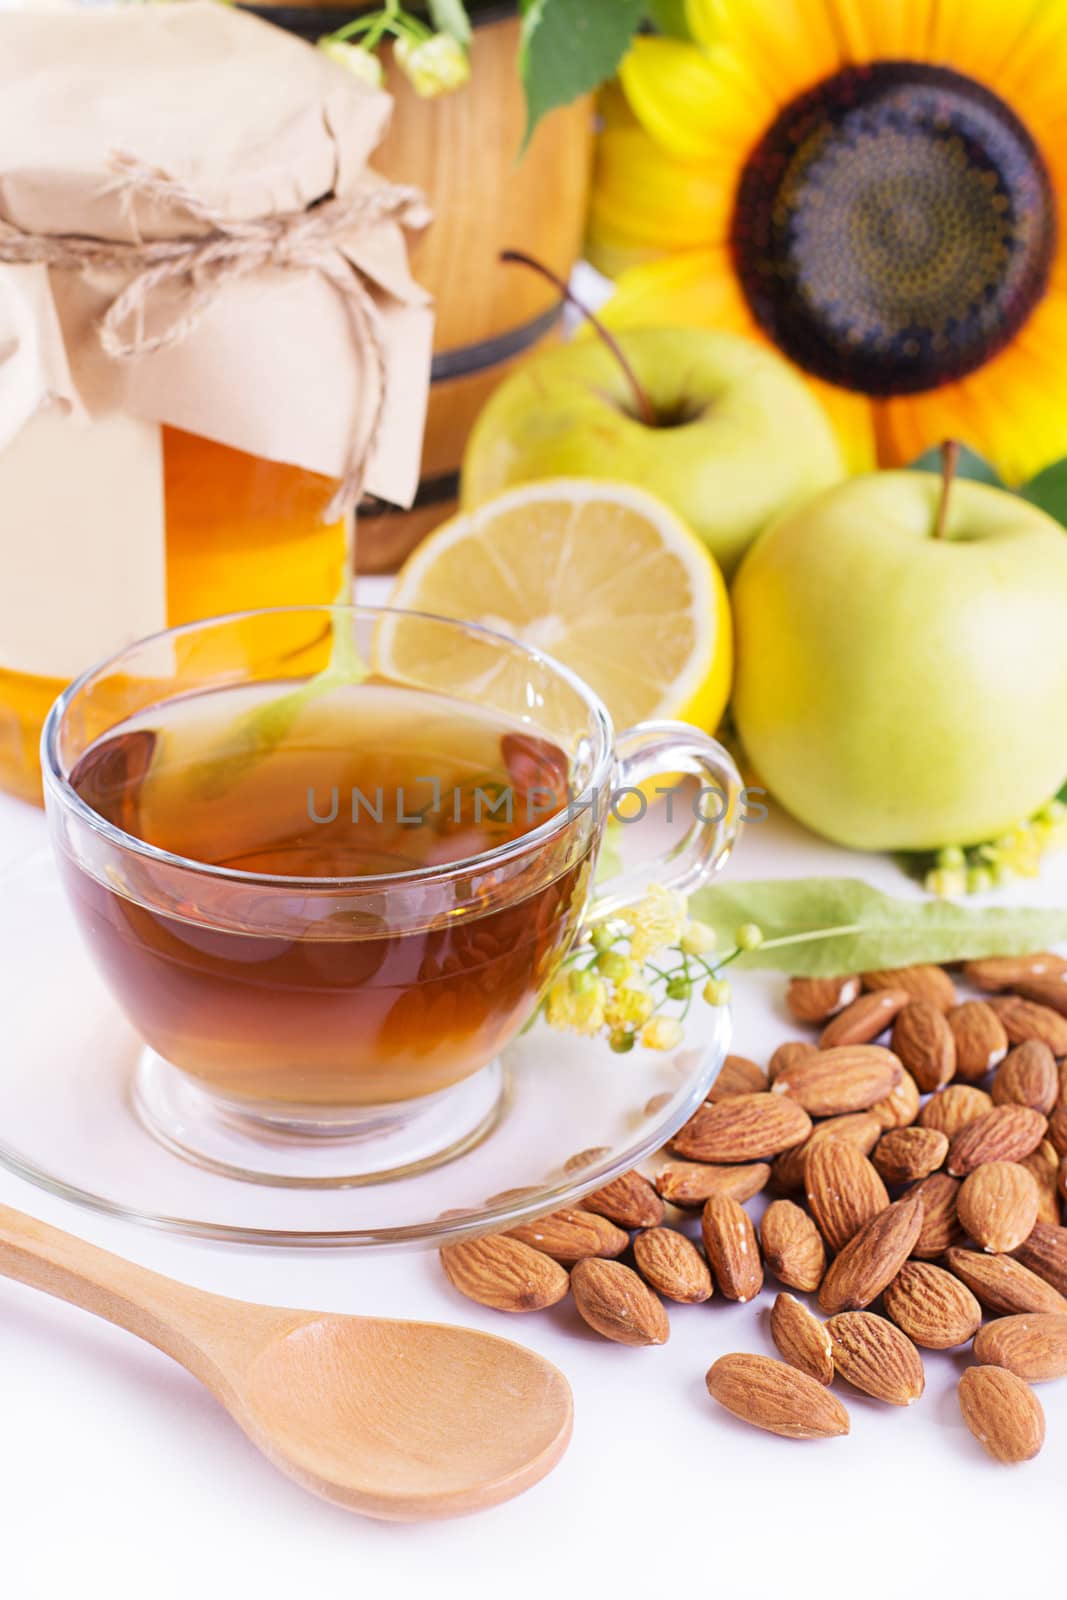 Cup of tea with linden honey, apples, almonds isolated on white